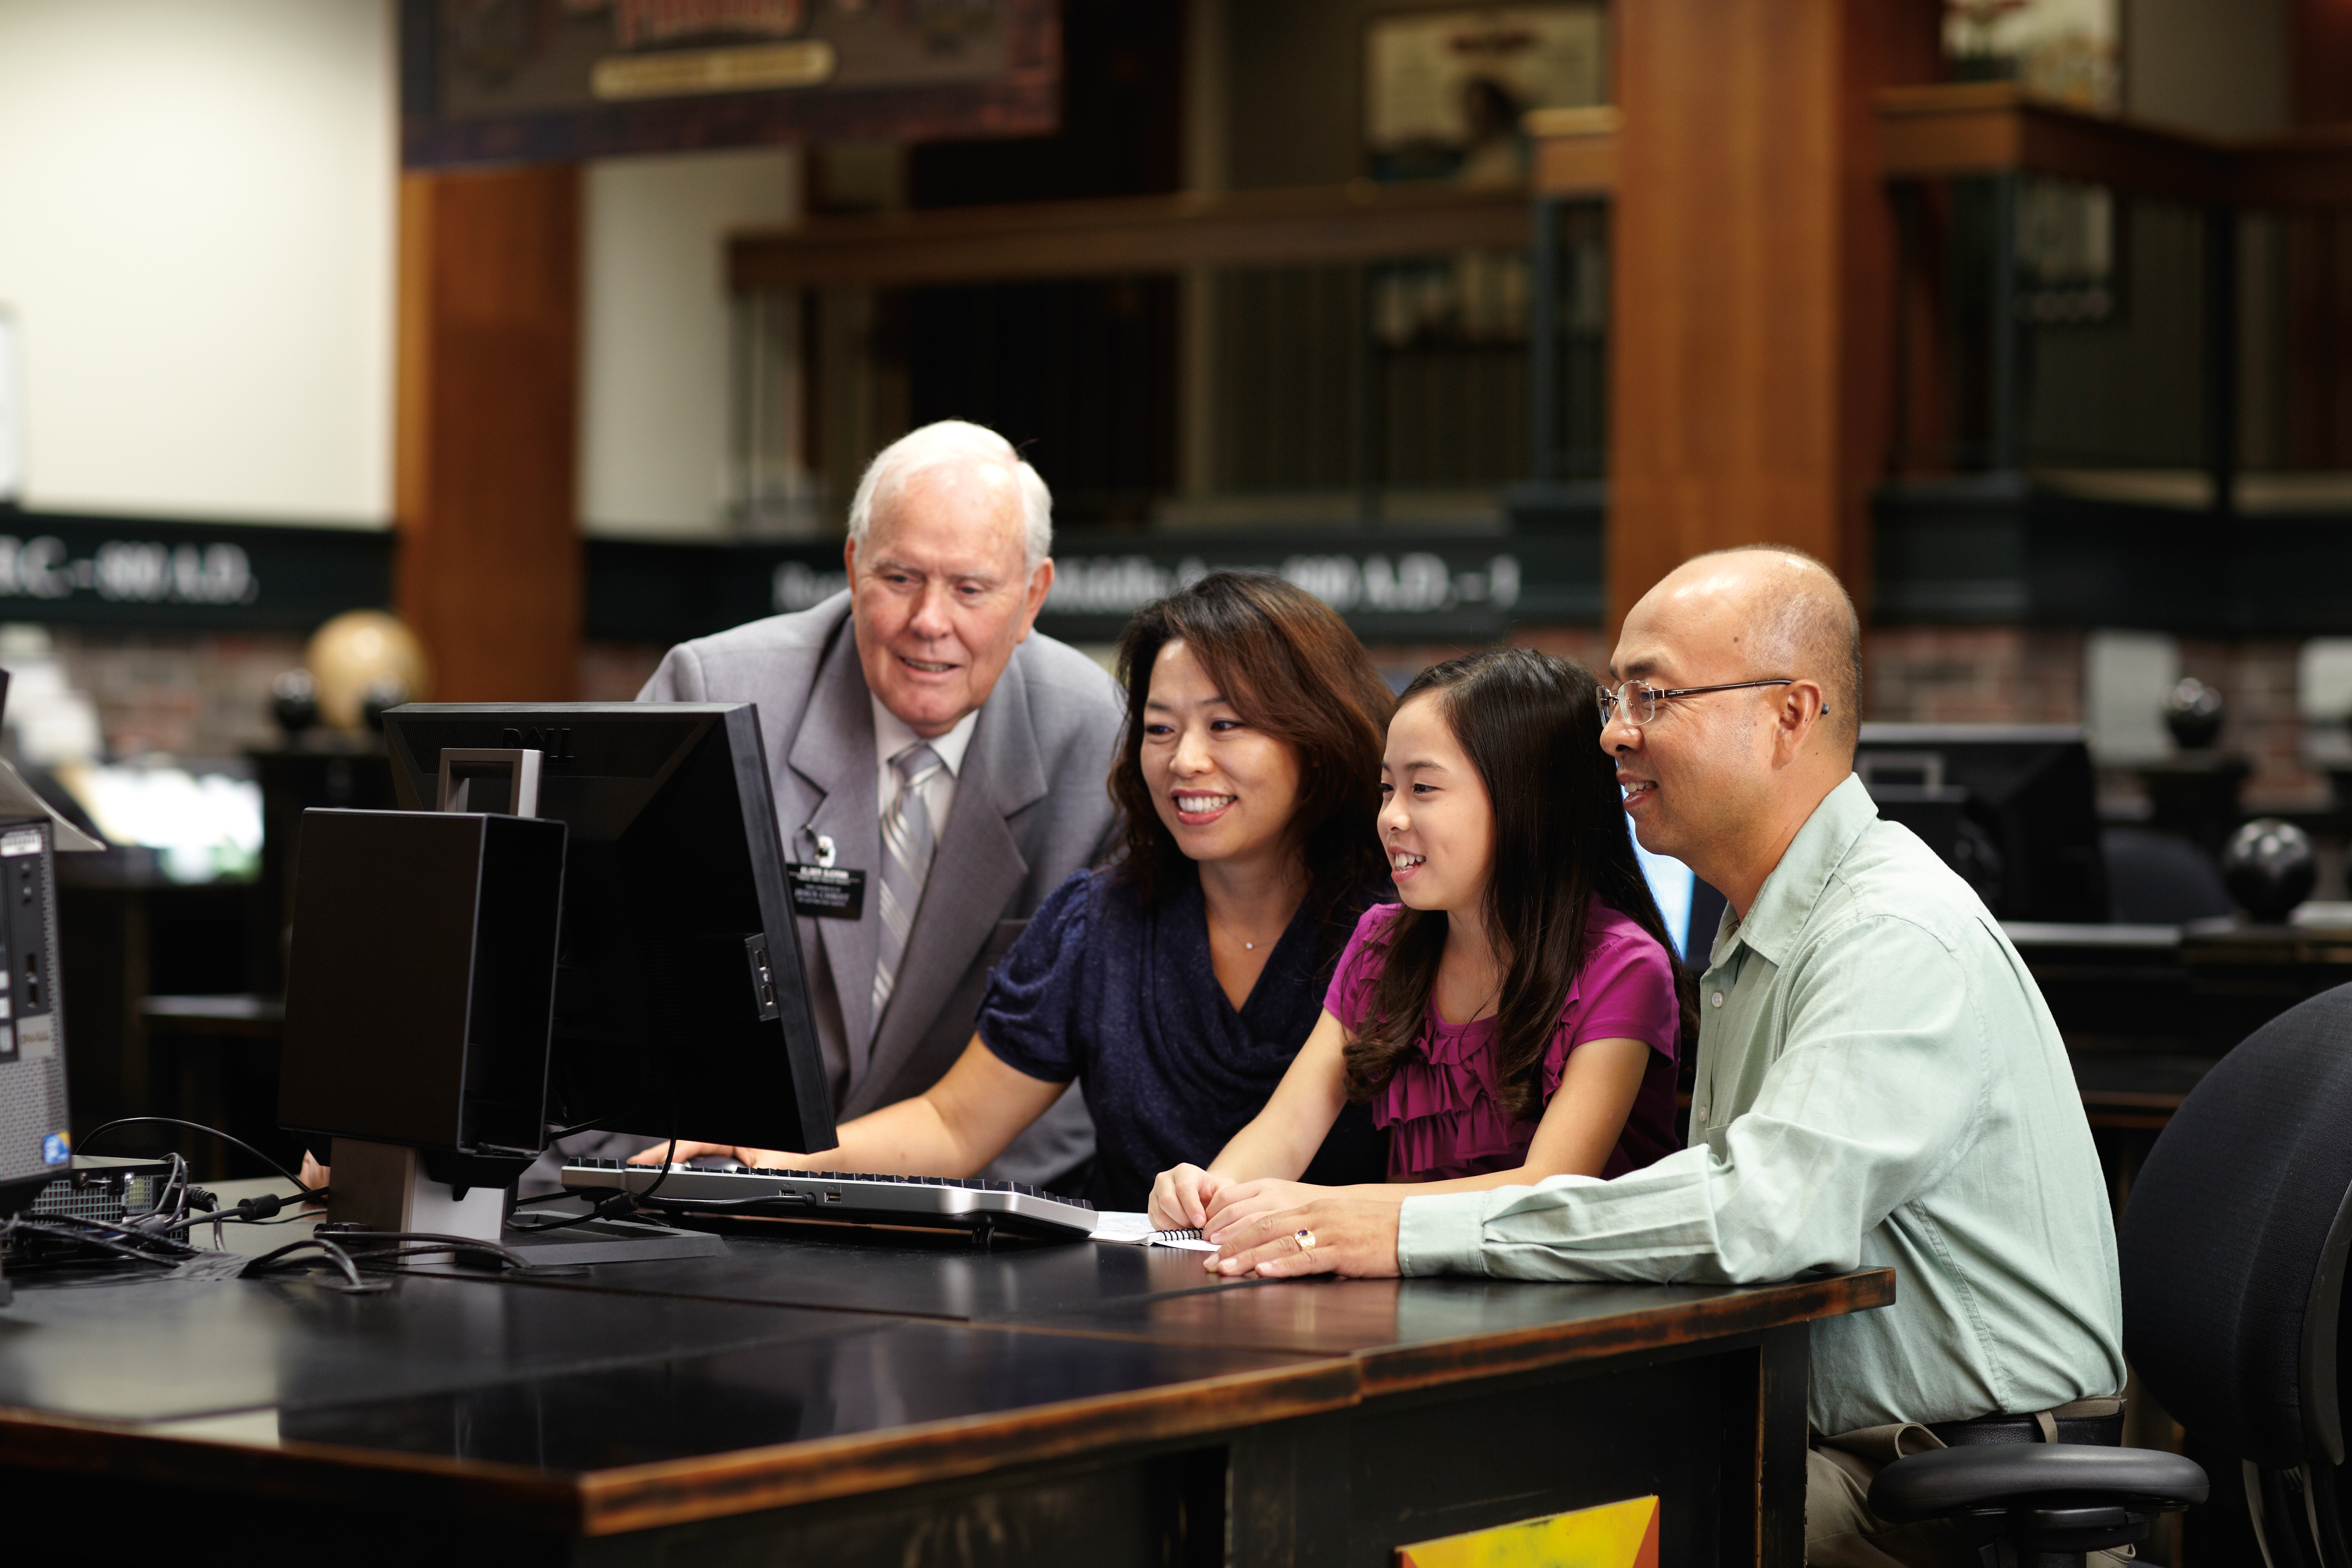 A senior elder missionary helps a young family at the computer do family history research.